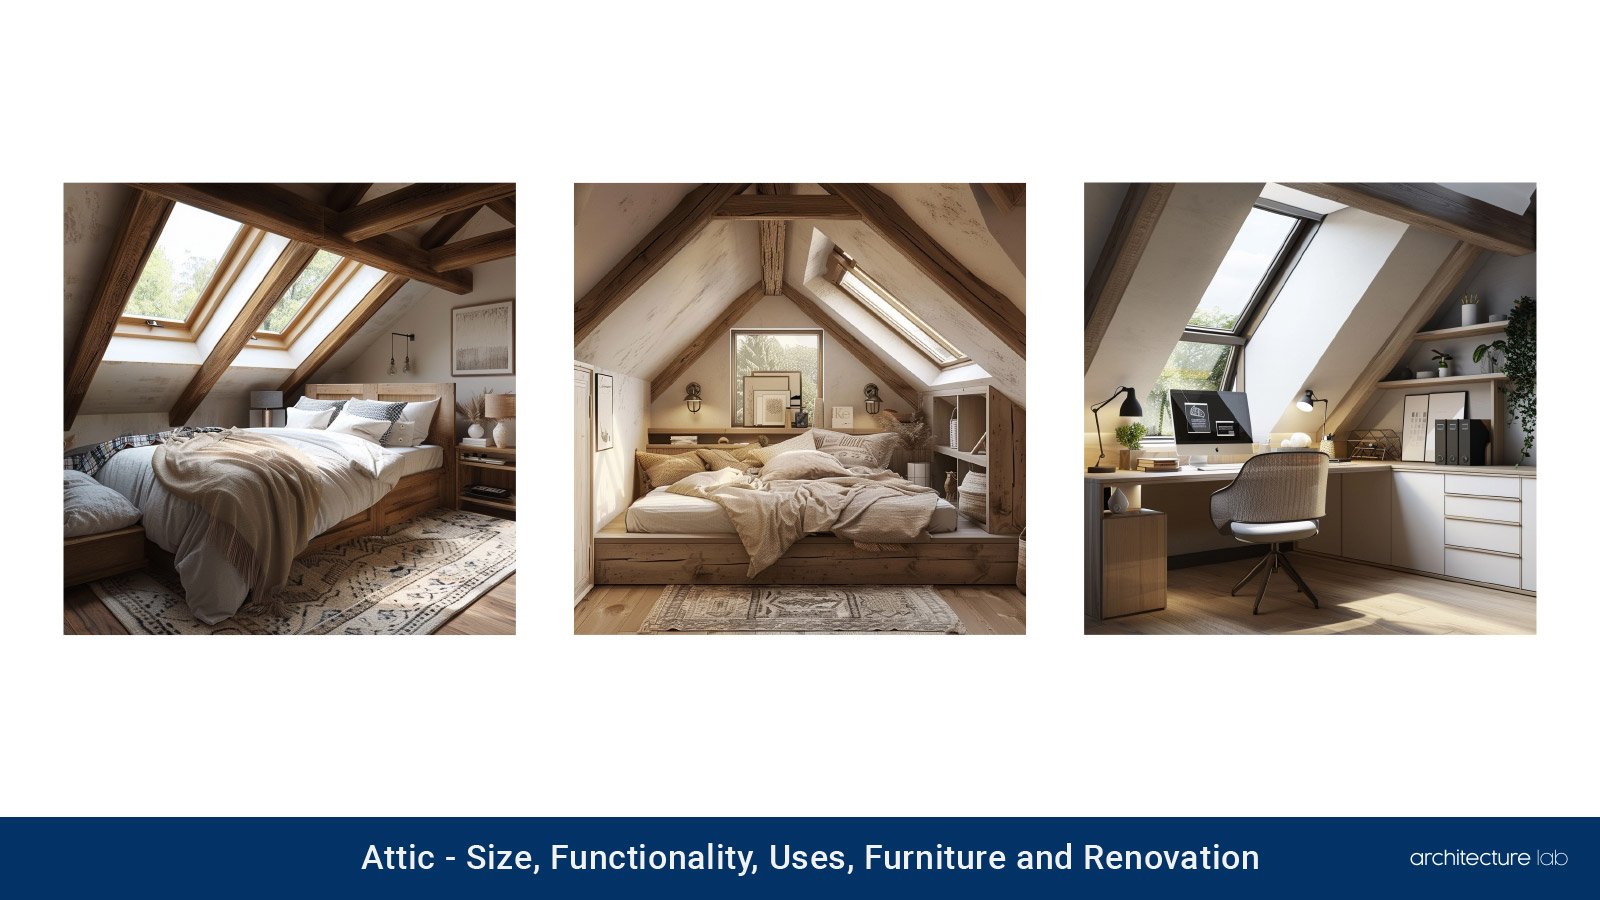 Attic: size, functionality, uses, furniture and renovation